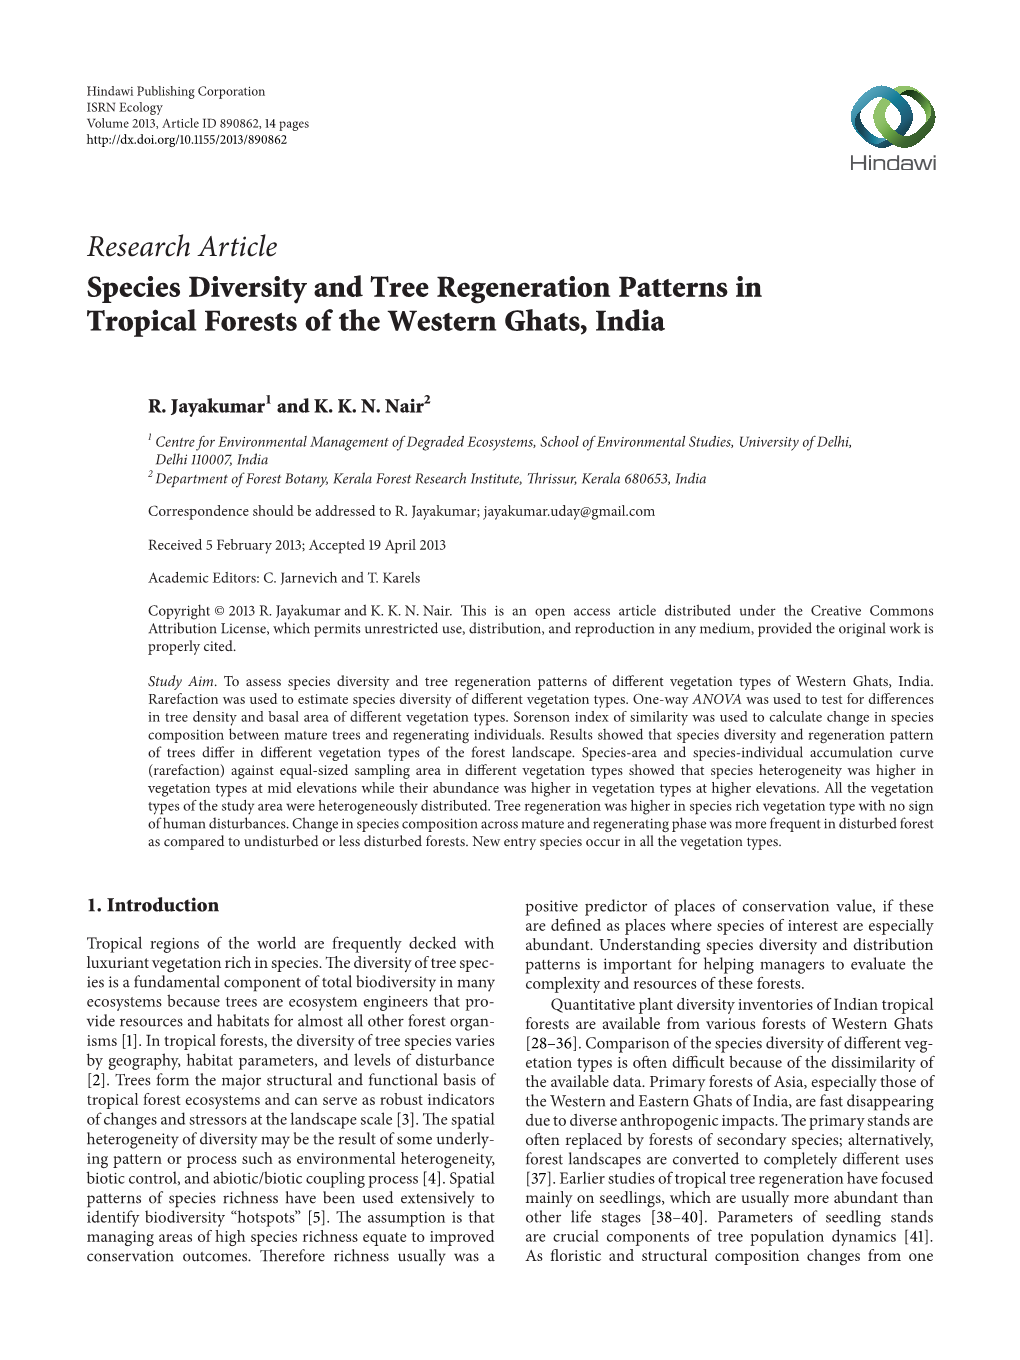 Species Diversity and Tree Regeneration Patterns in Tropical Forests of the Western Ghats, India